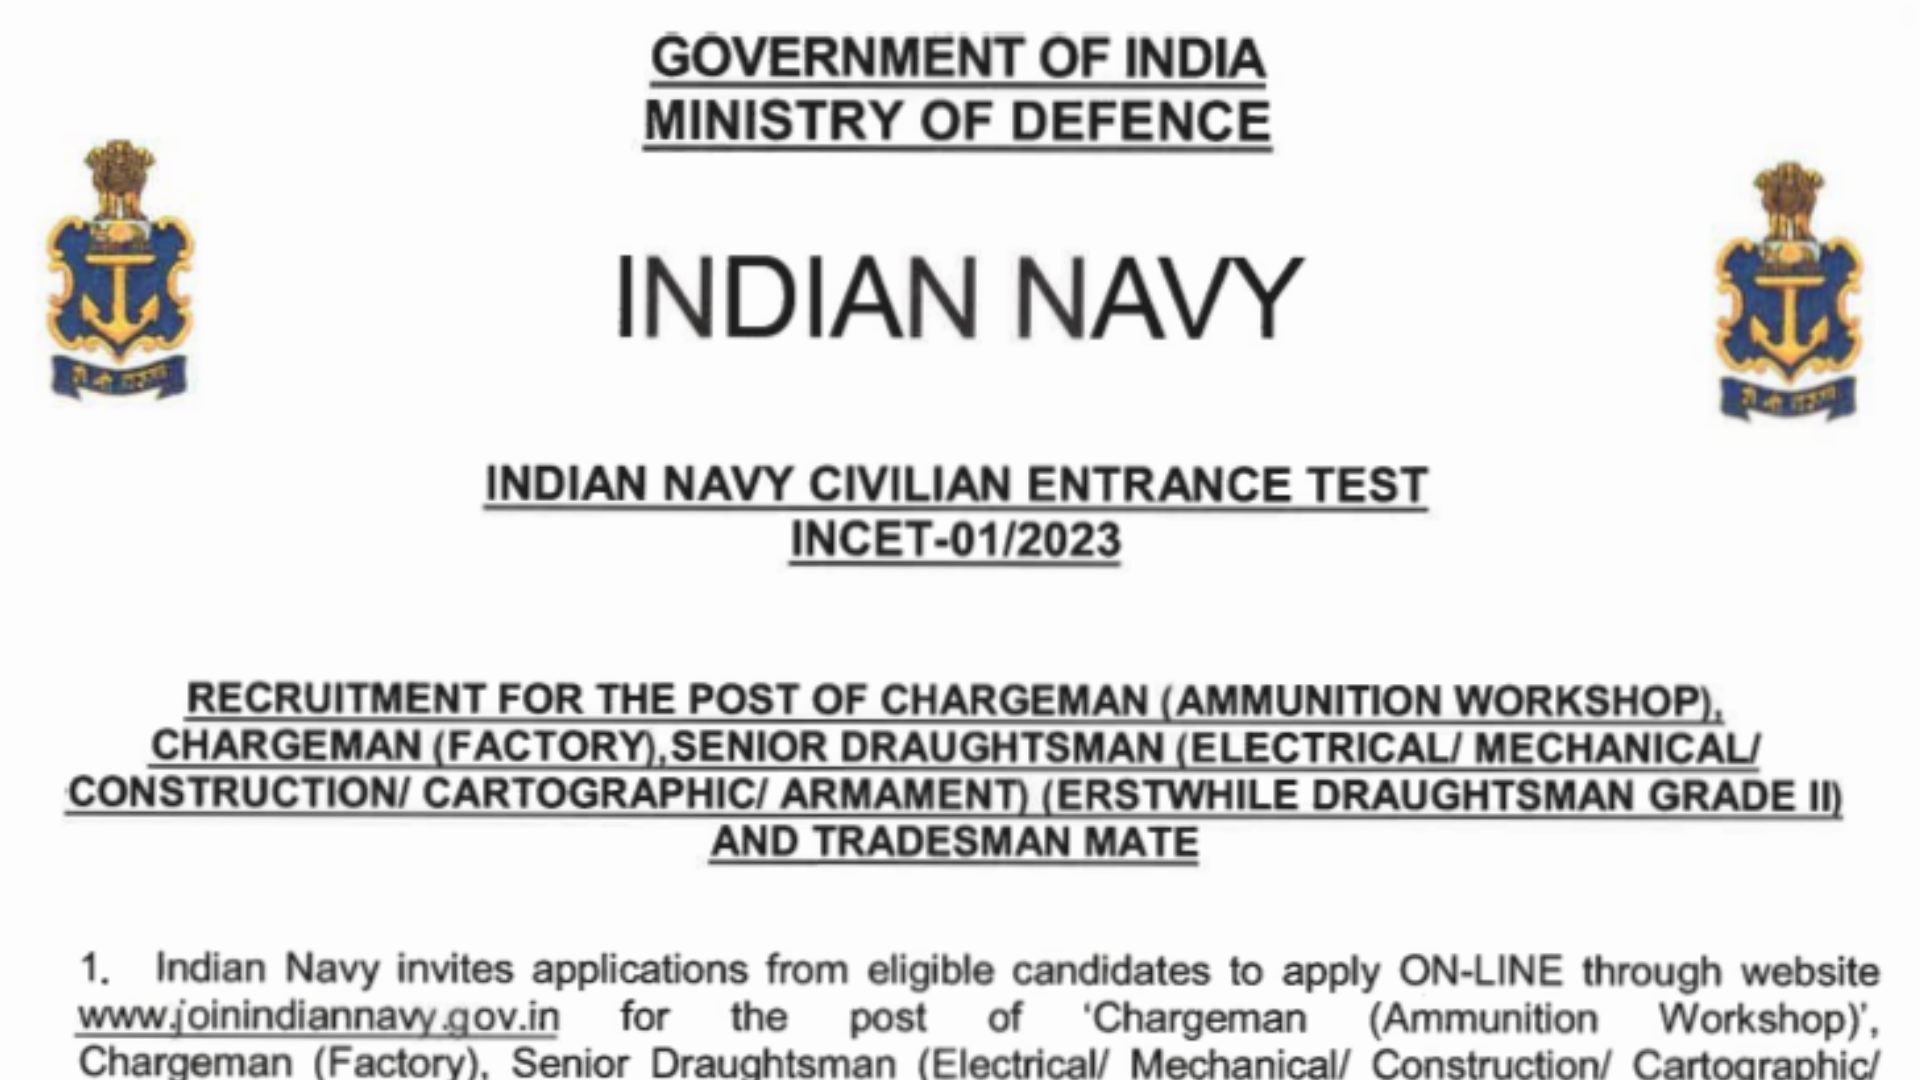 Navy INCET 1/2023 Notification Out for Chargeman, Tradesman Mate, and Draughtsman 910 Posts, Apply Online